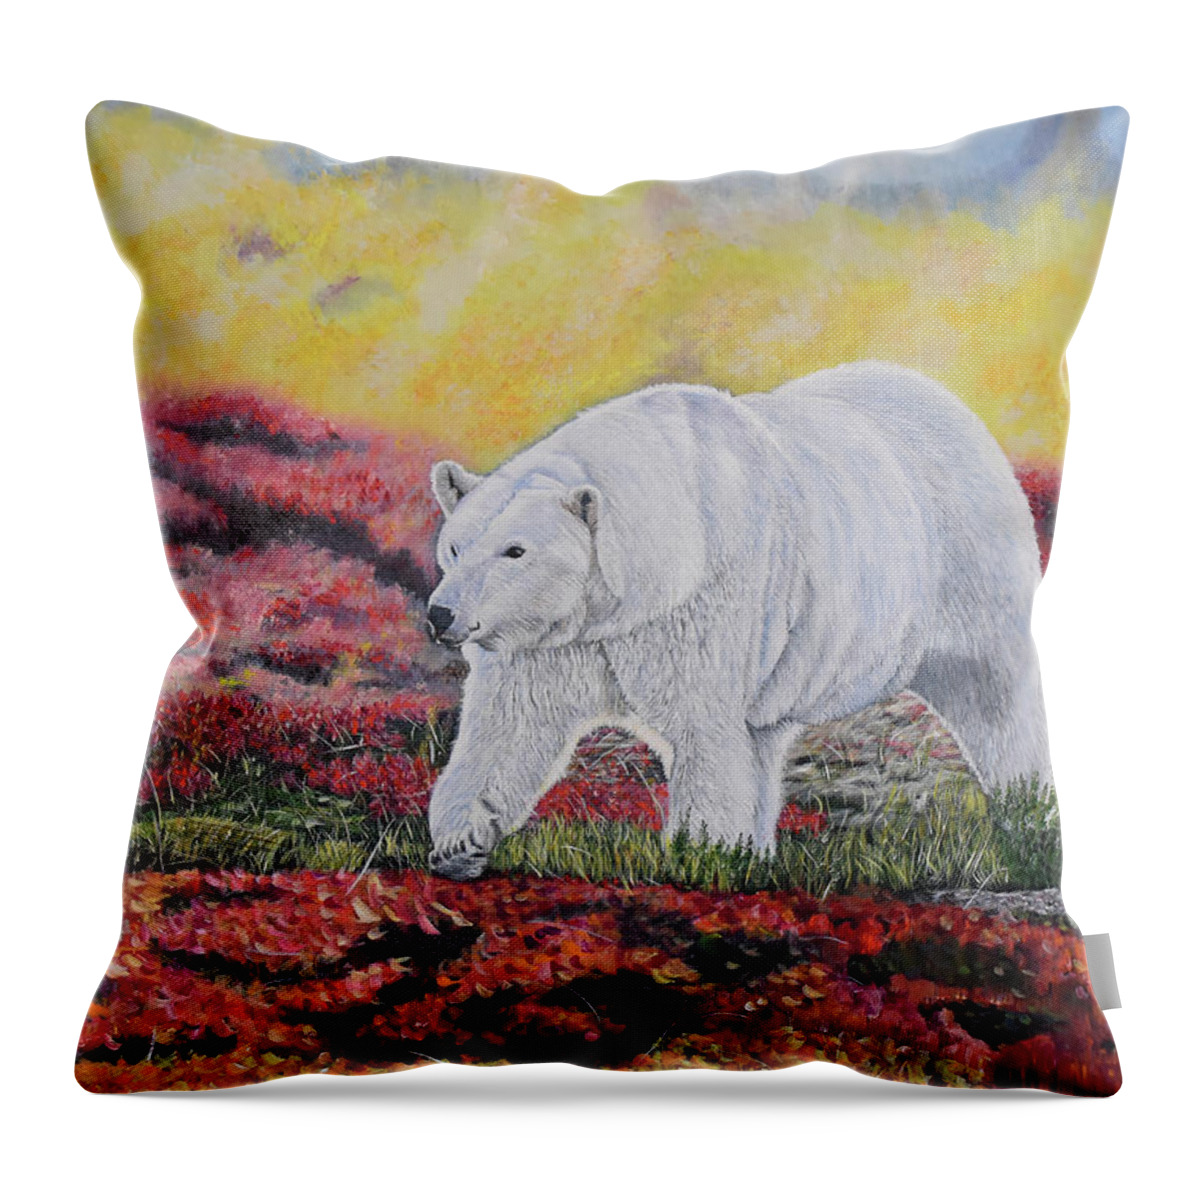 Polar Bear Throw Pillow featuring the painting The Prowler by Marilyn McNish